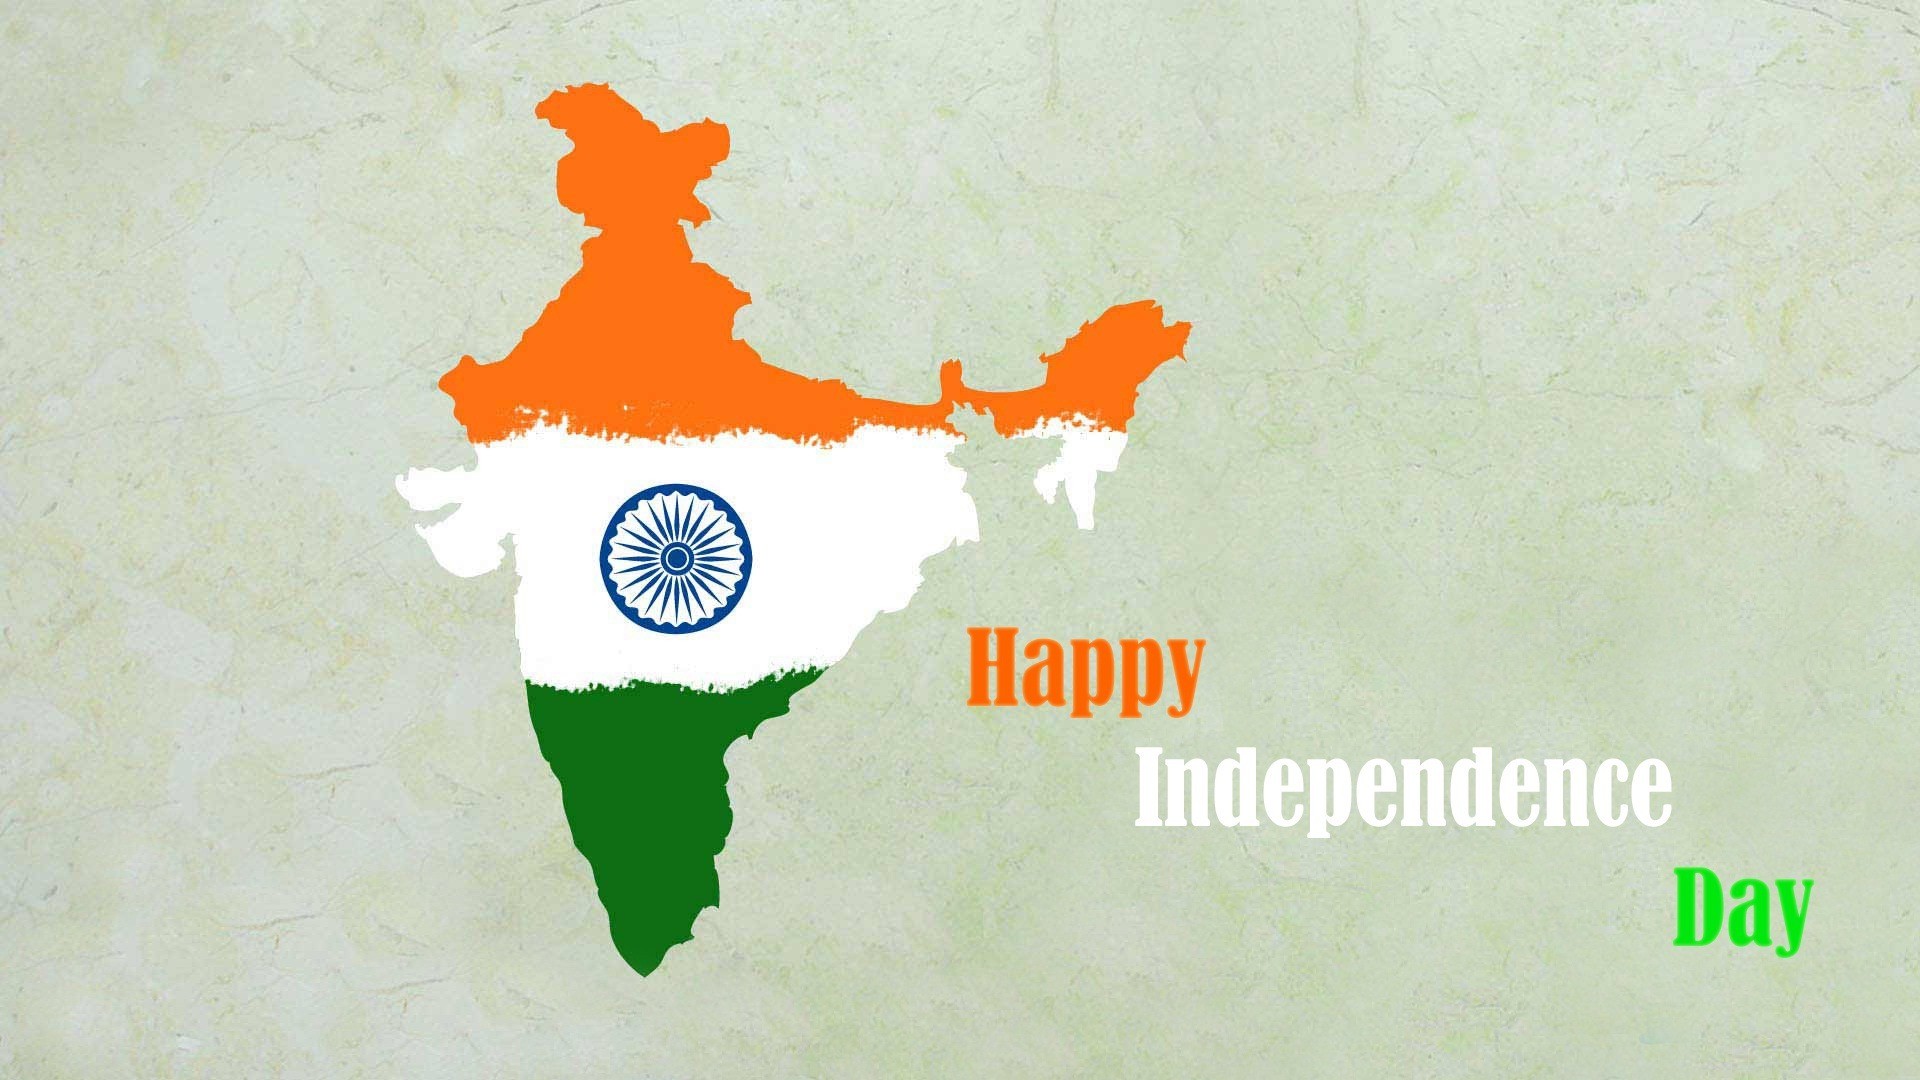 independence day wallpaper,logo,world,map,graphics,illustration